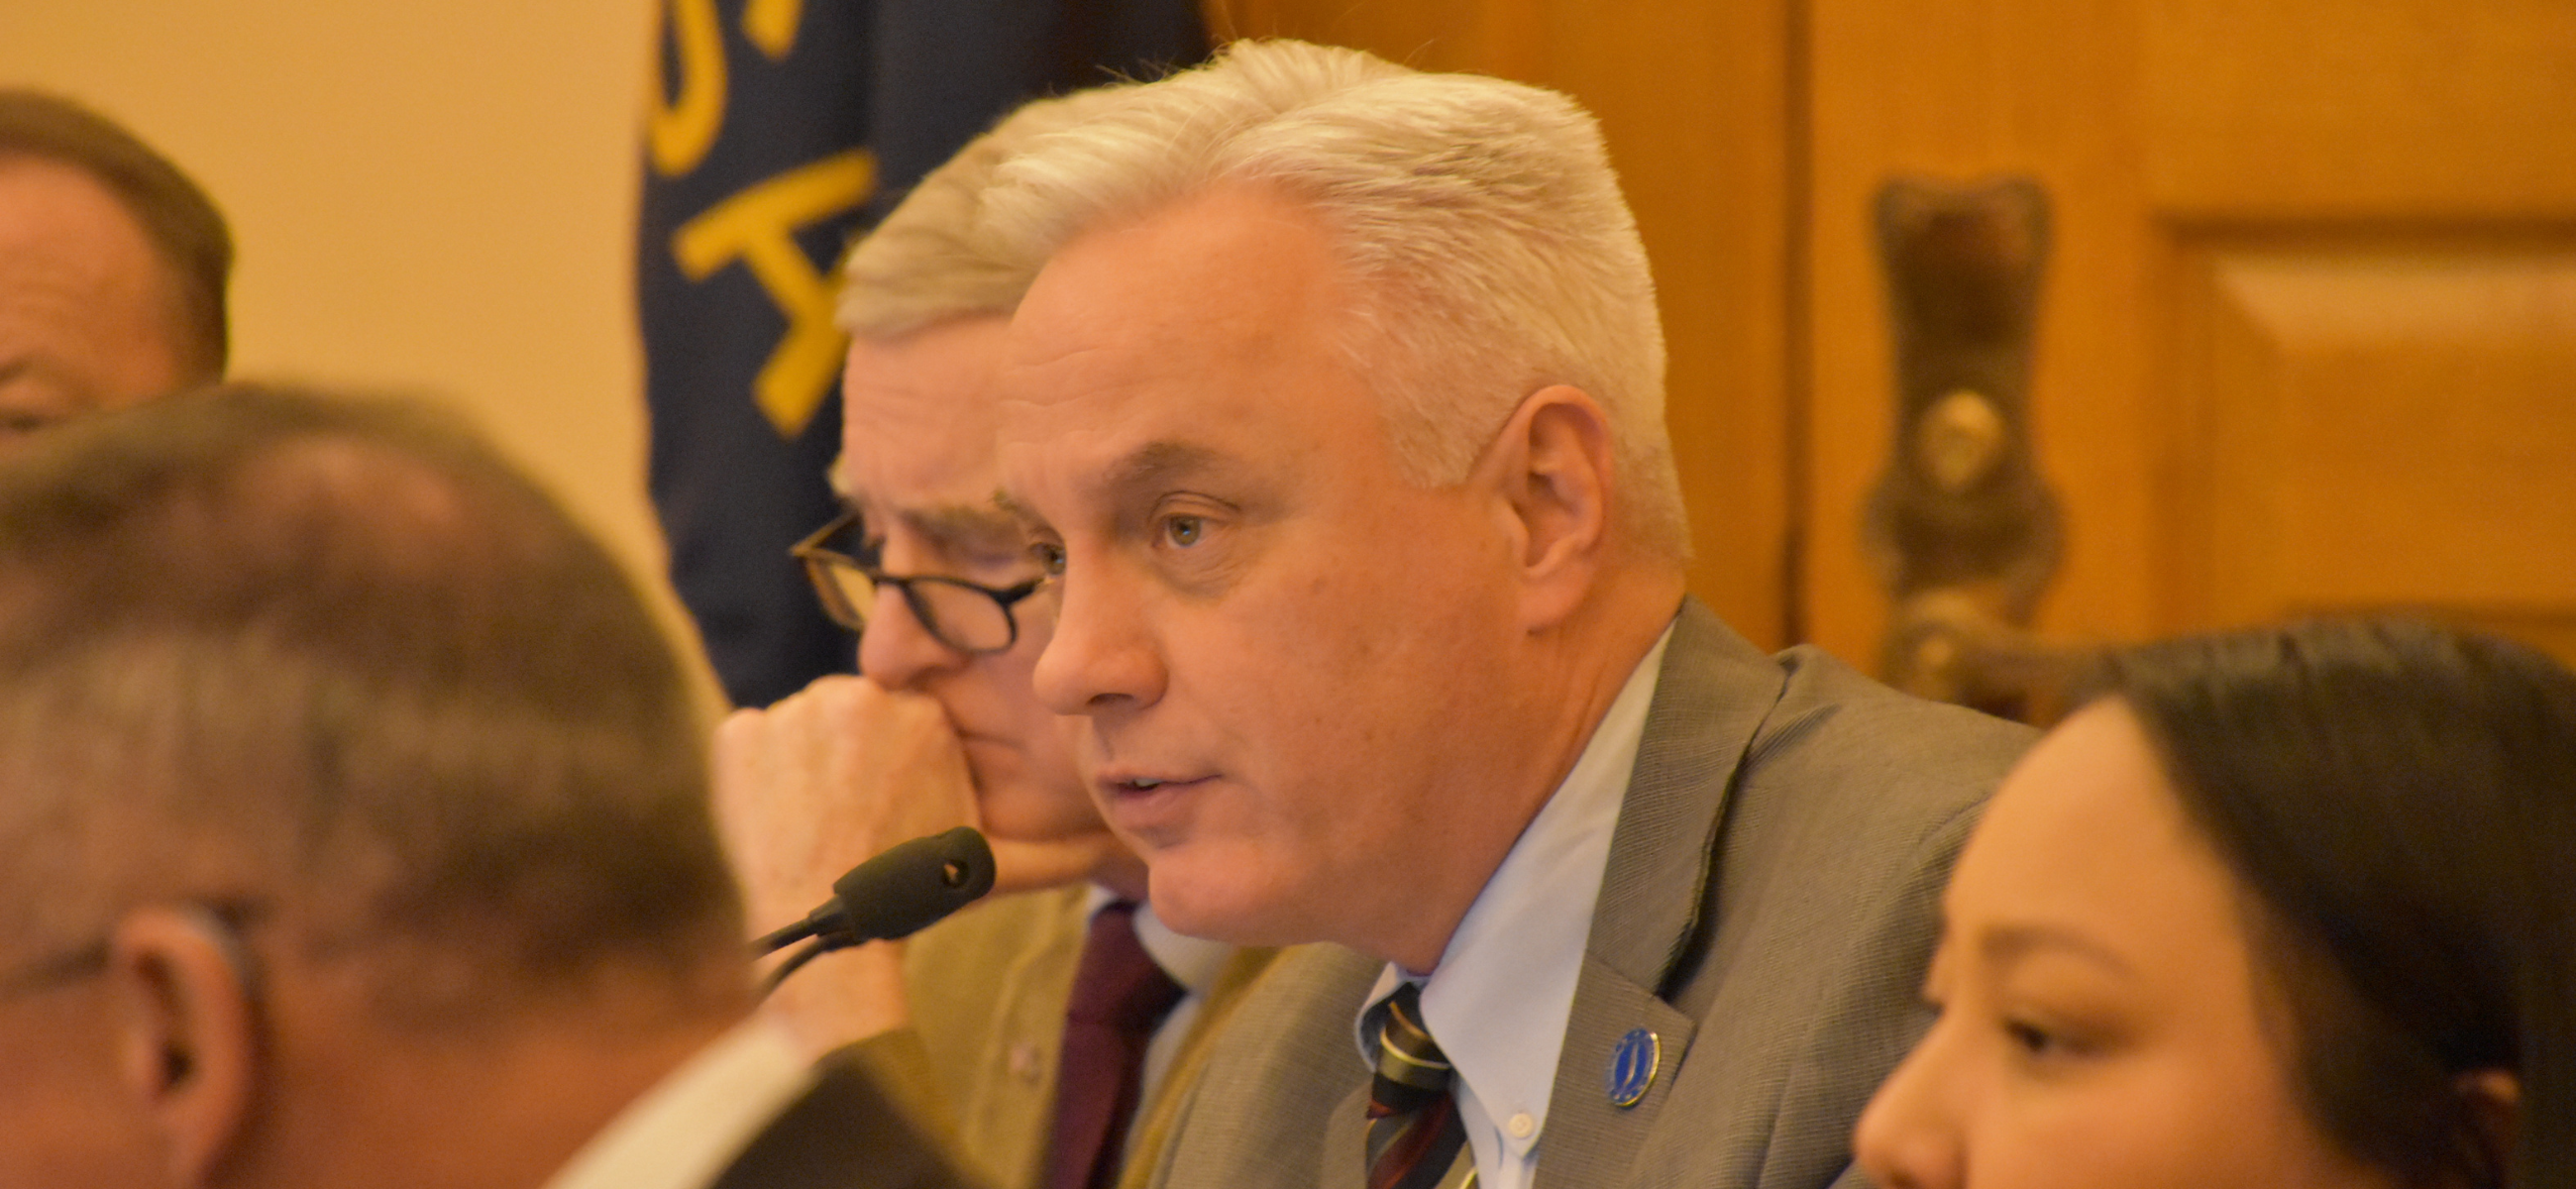 Rep. Ron Bryce speaks Feb. 12 during a House Health and Human Services Committee hearing.